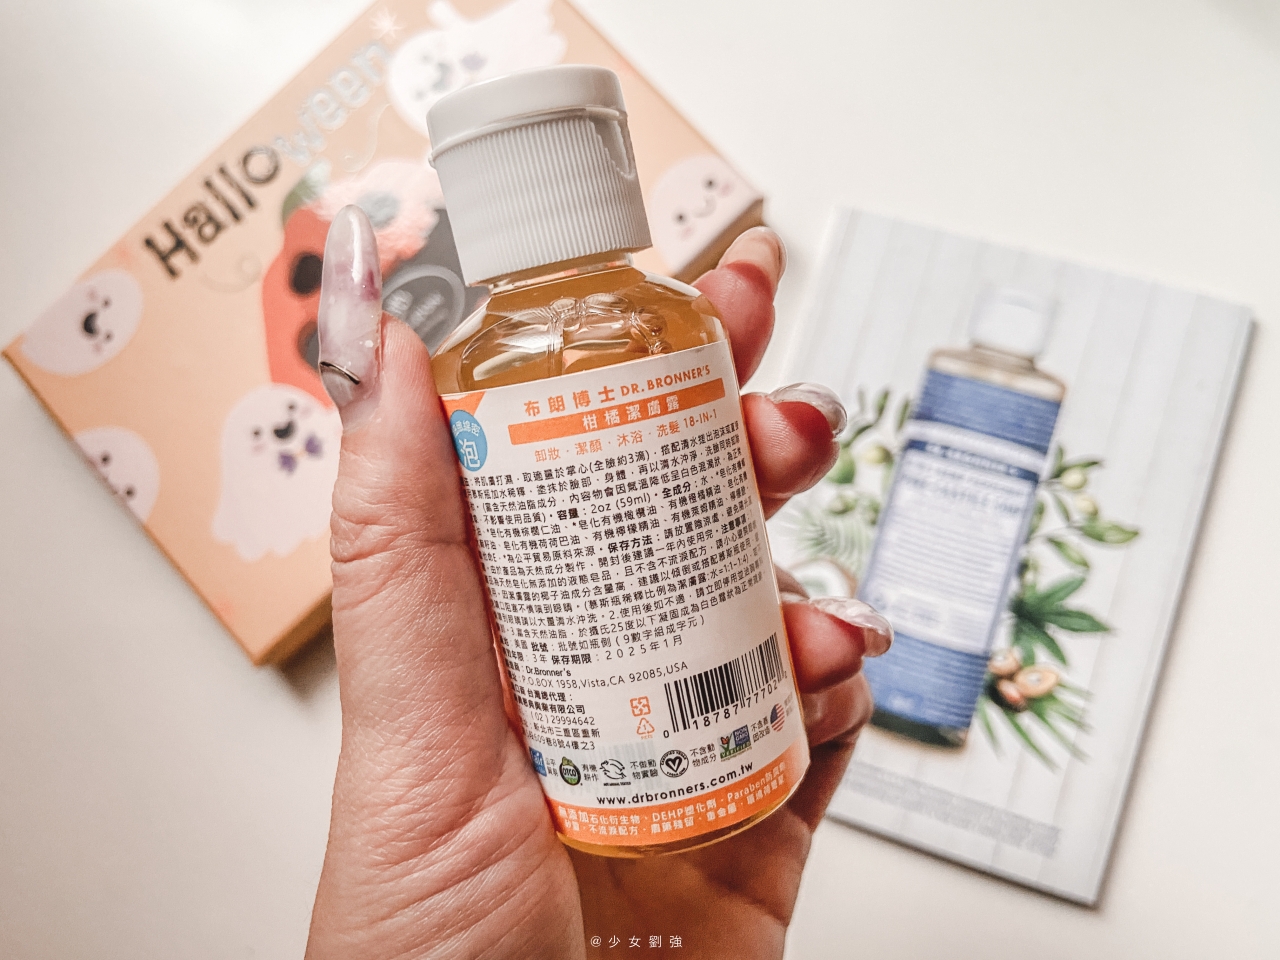 Dr.Bronner's 布朗博士 18 in 1 全效潔膚露